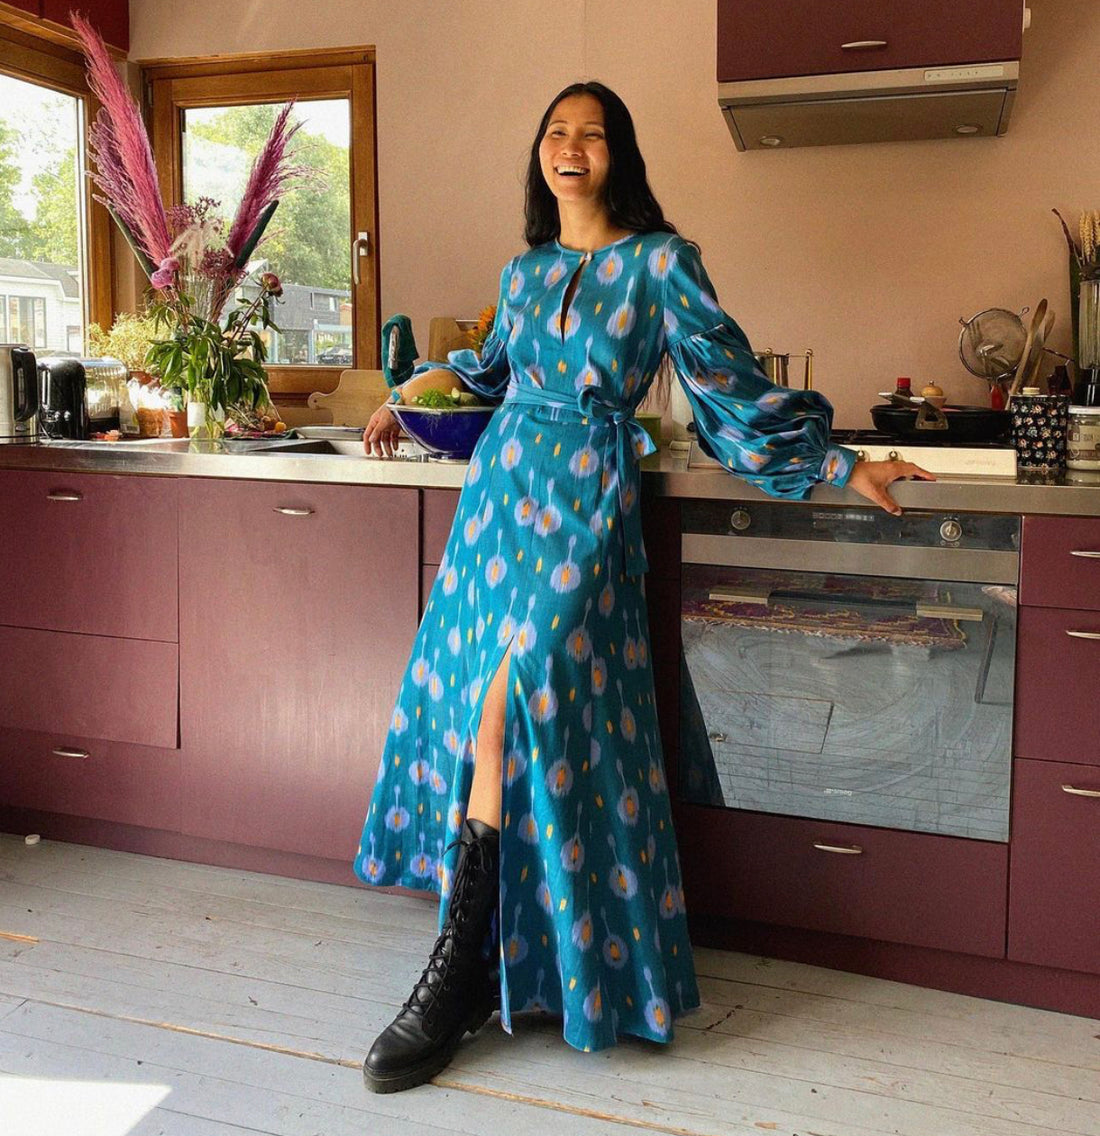 Interview with Sita Sunar, founder of Conscious Mandal - Wunder Workshop